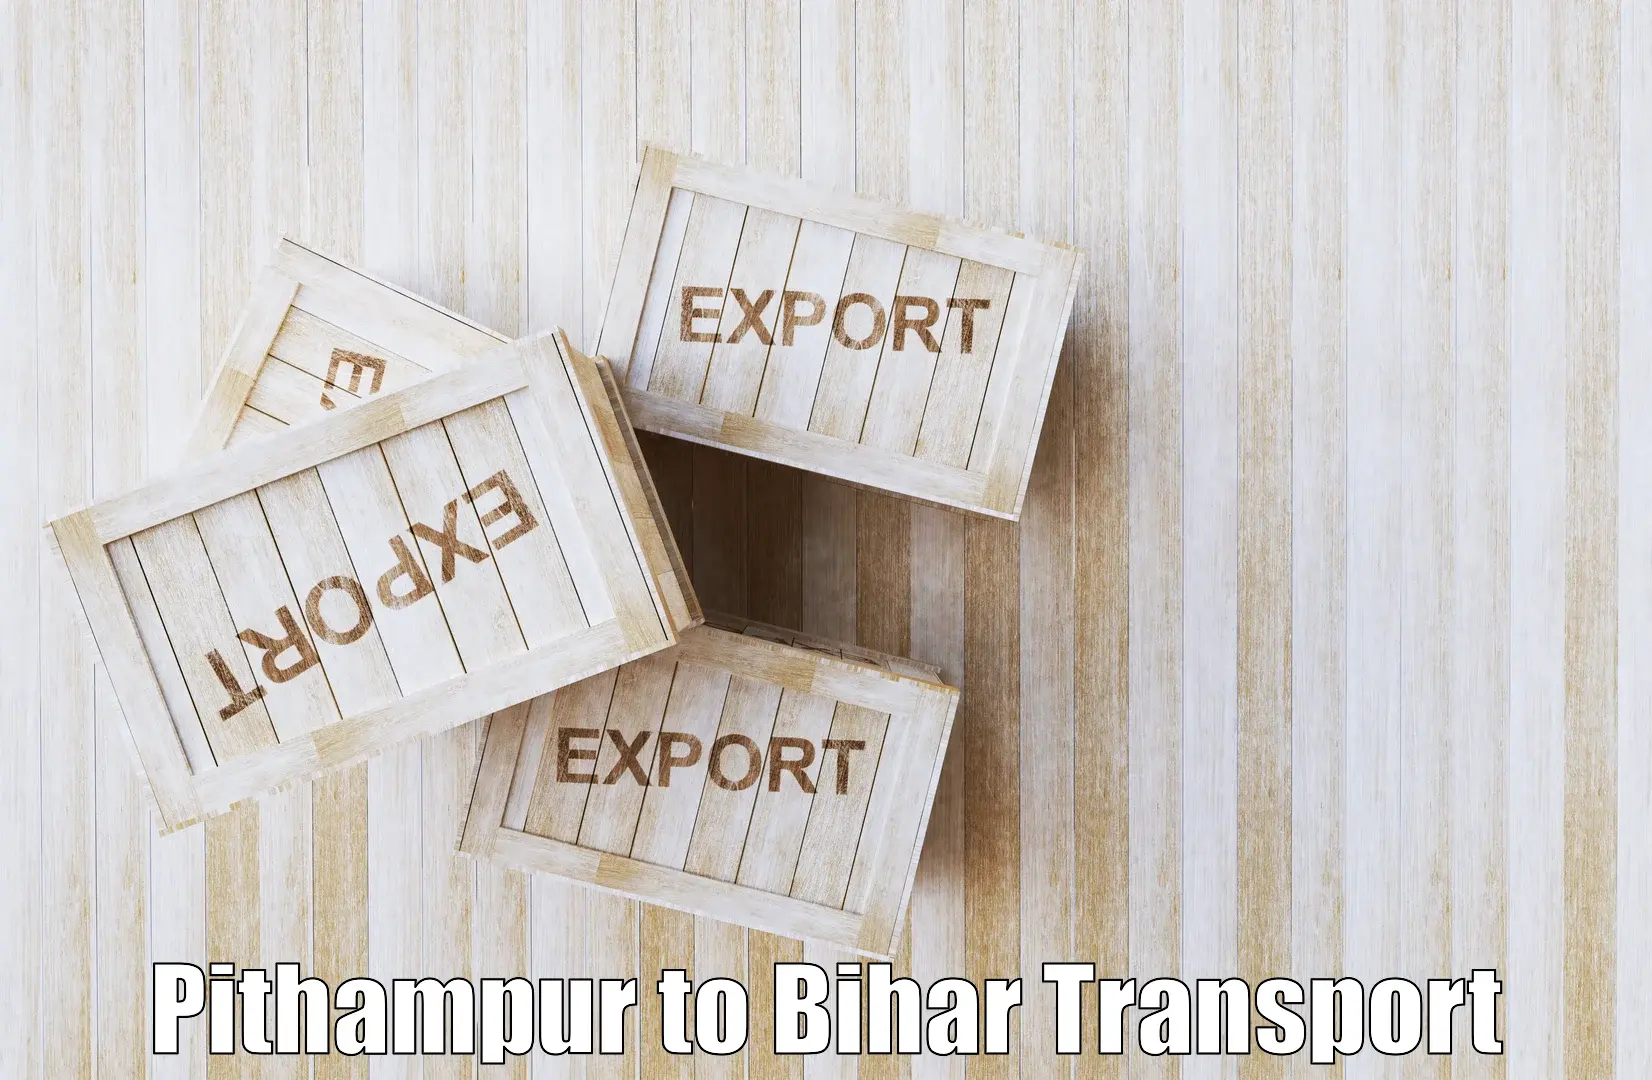 Best transport services in India Pithampur to Jalalgarh